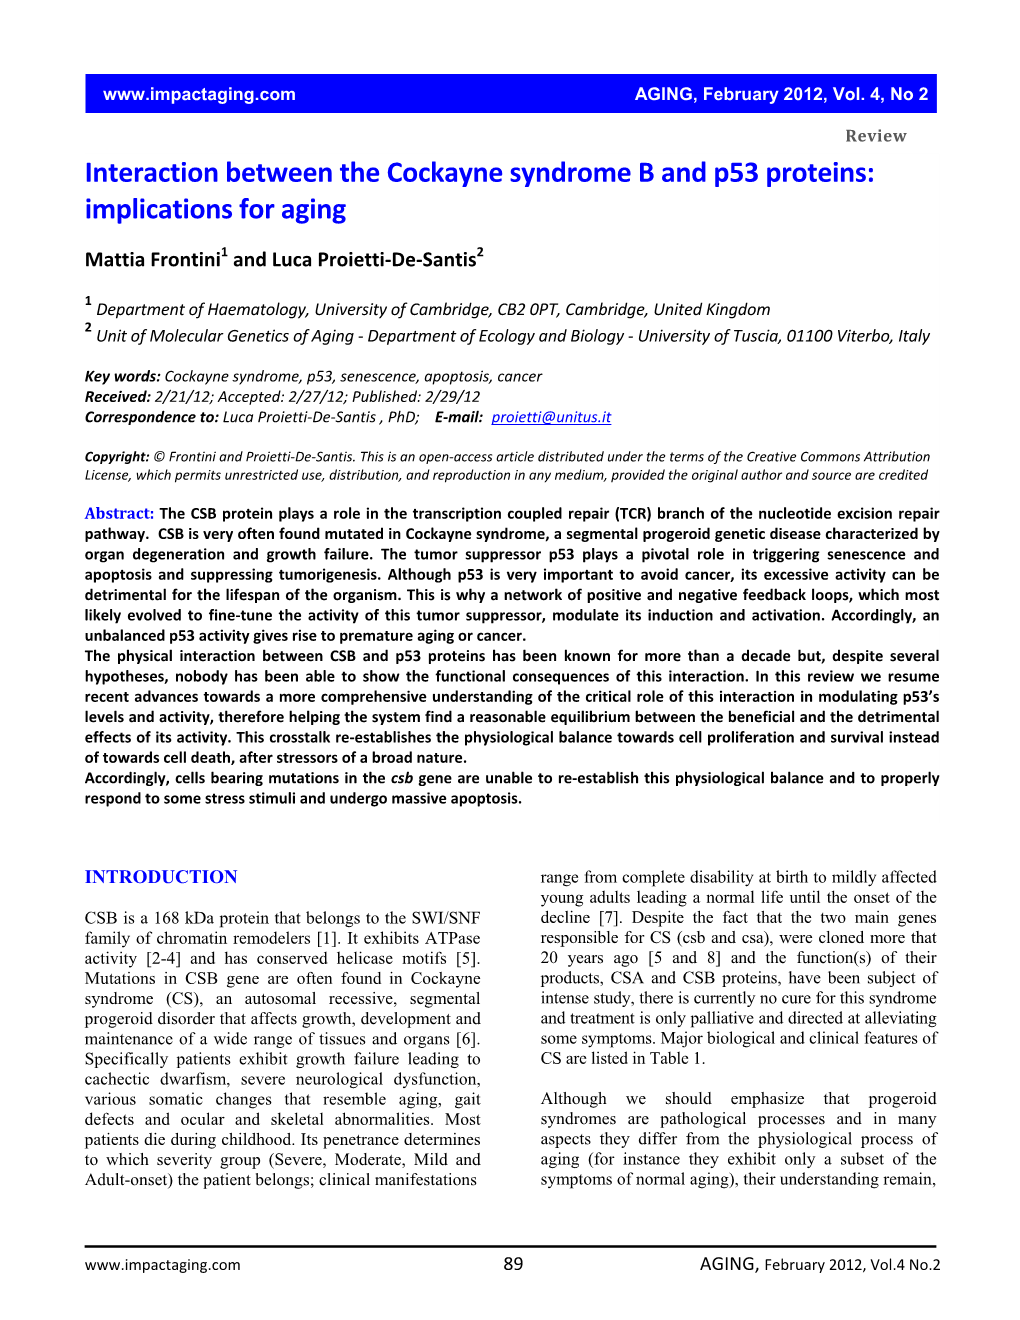 Interaction Between the Cockayne Syndrome B and P53 Proteins